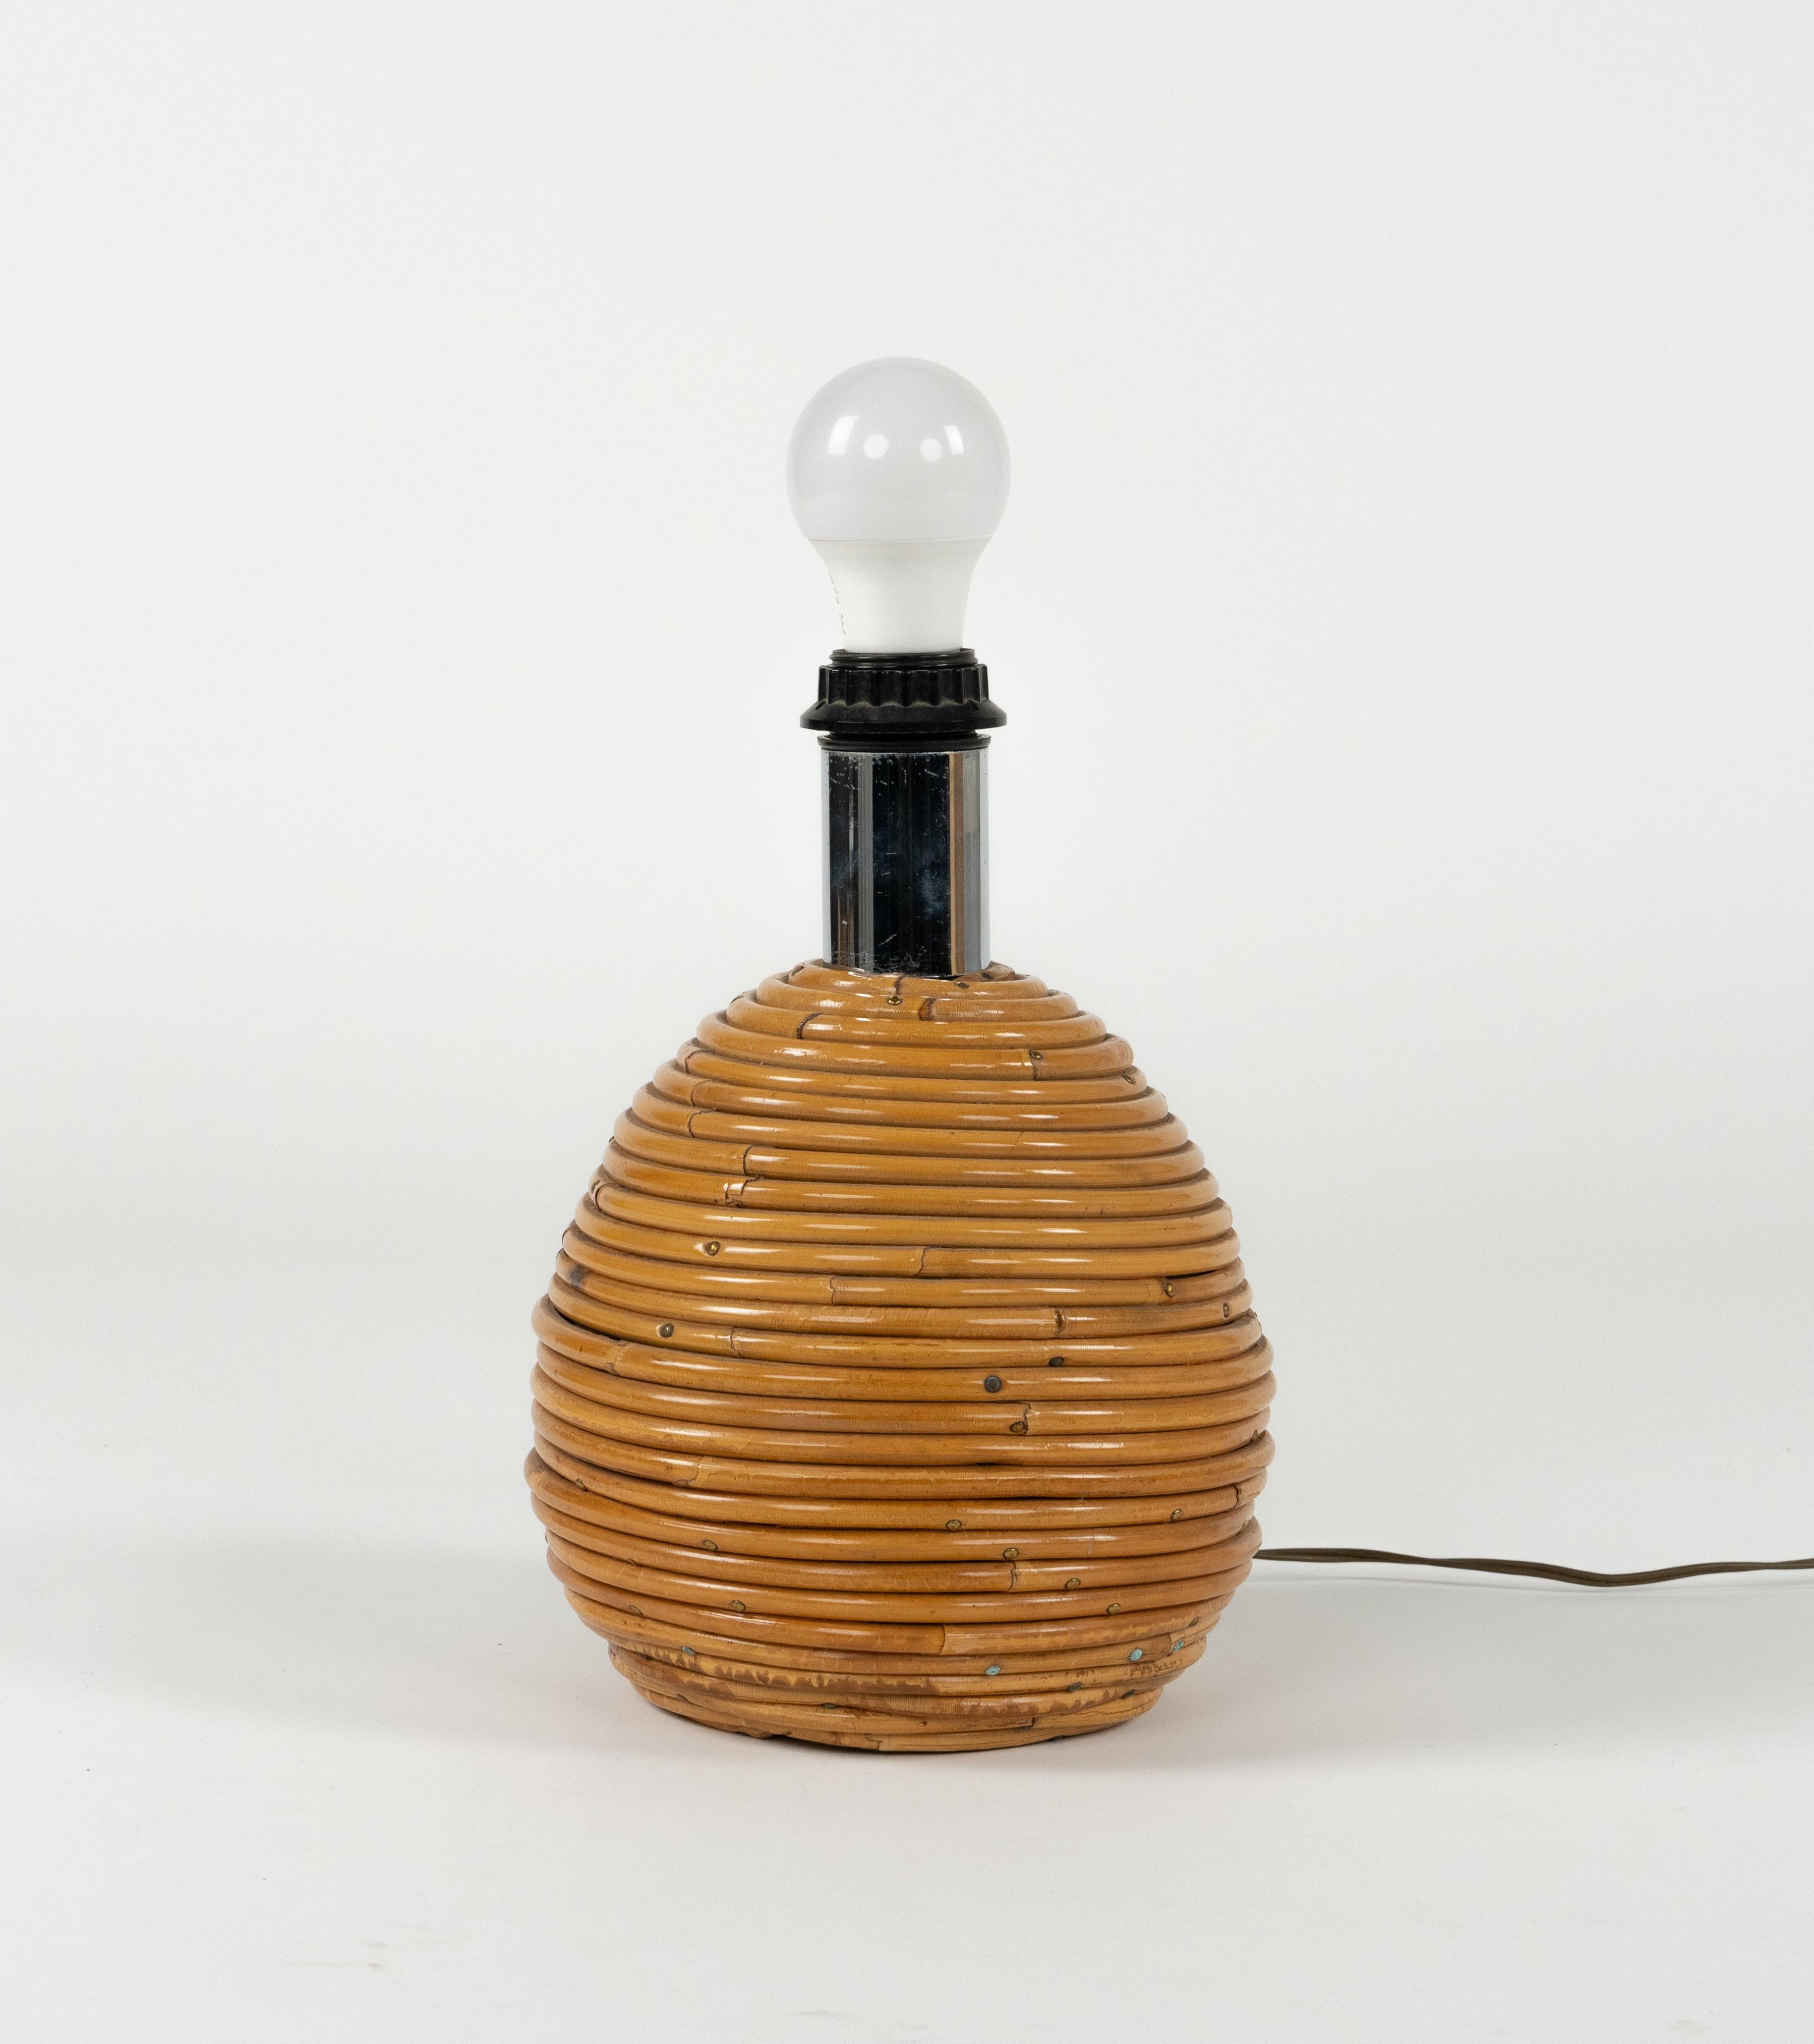 Midcentury Rattan, Wicker and Chrome Table Lamp by Vivai Del Sud, Italy 1970s For Sale 7